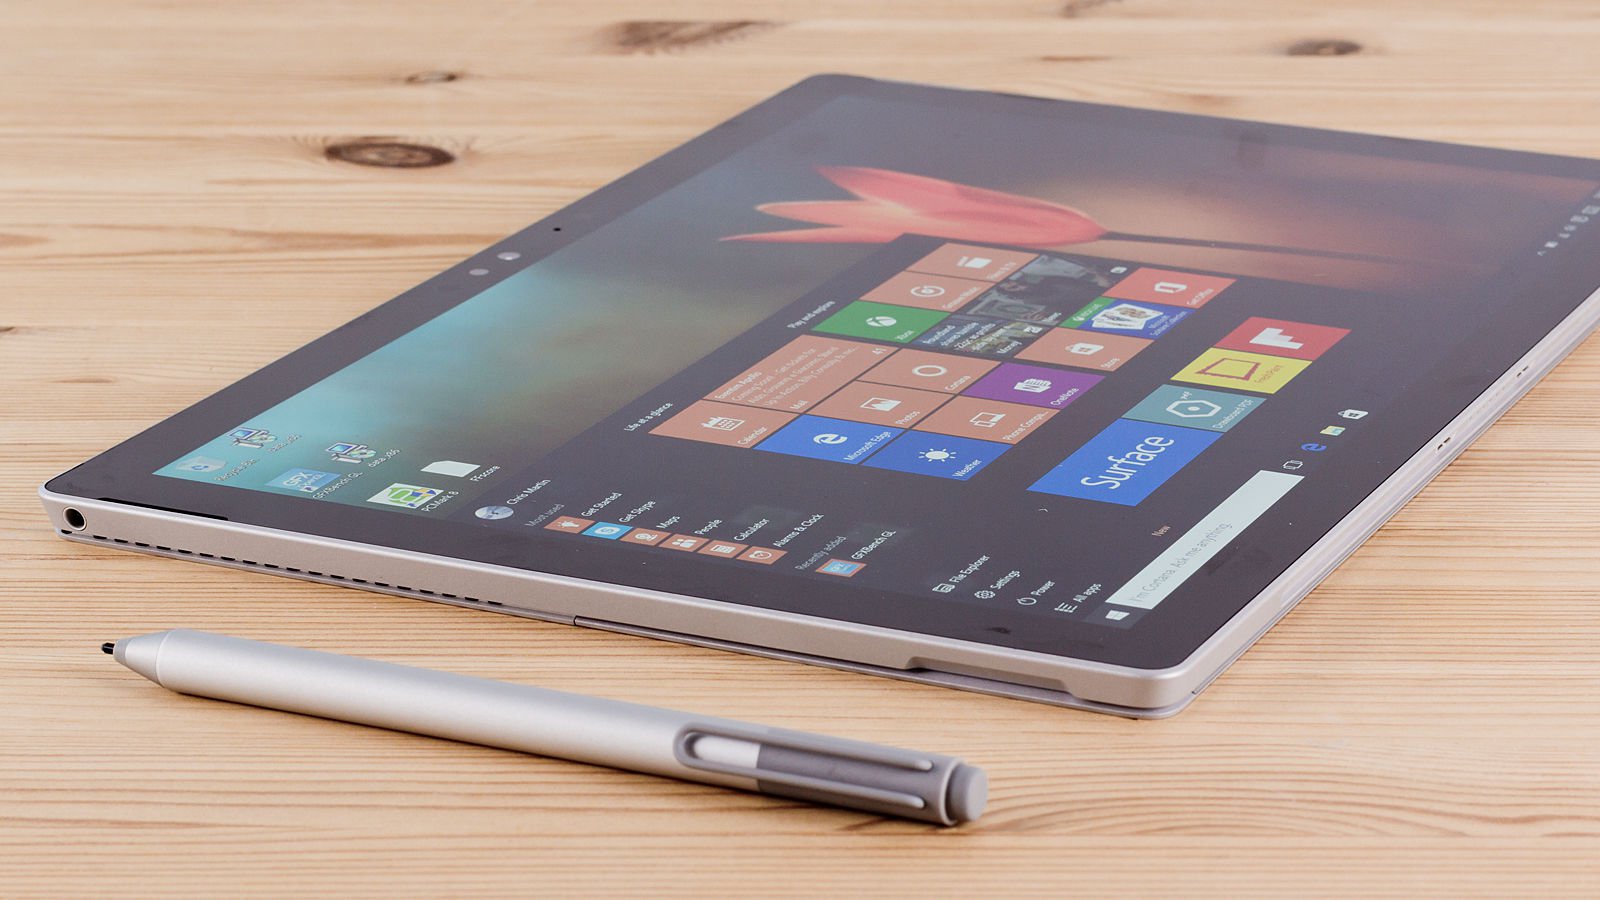 Surface Phone concept image - Microsoft